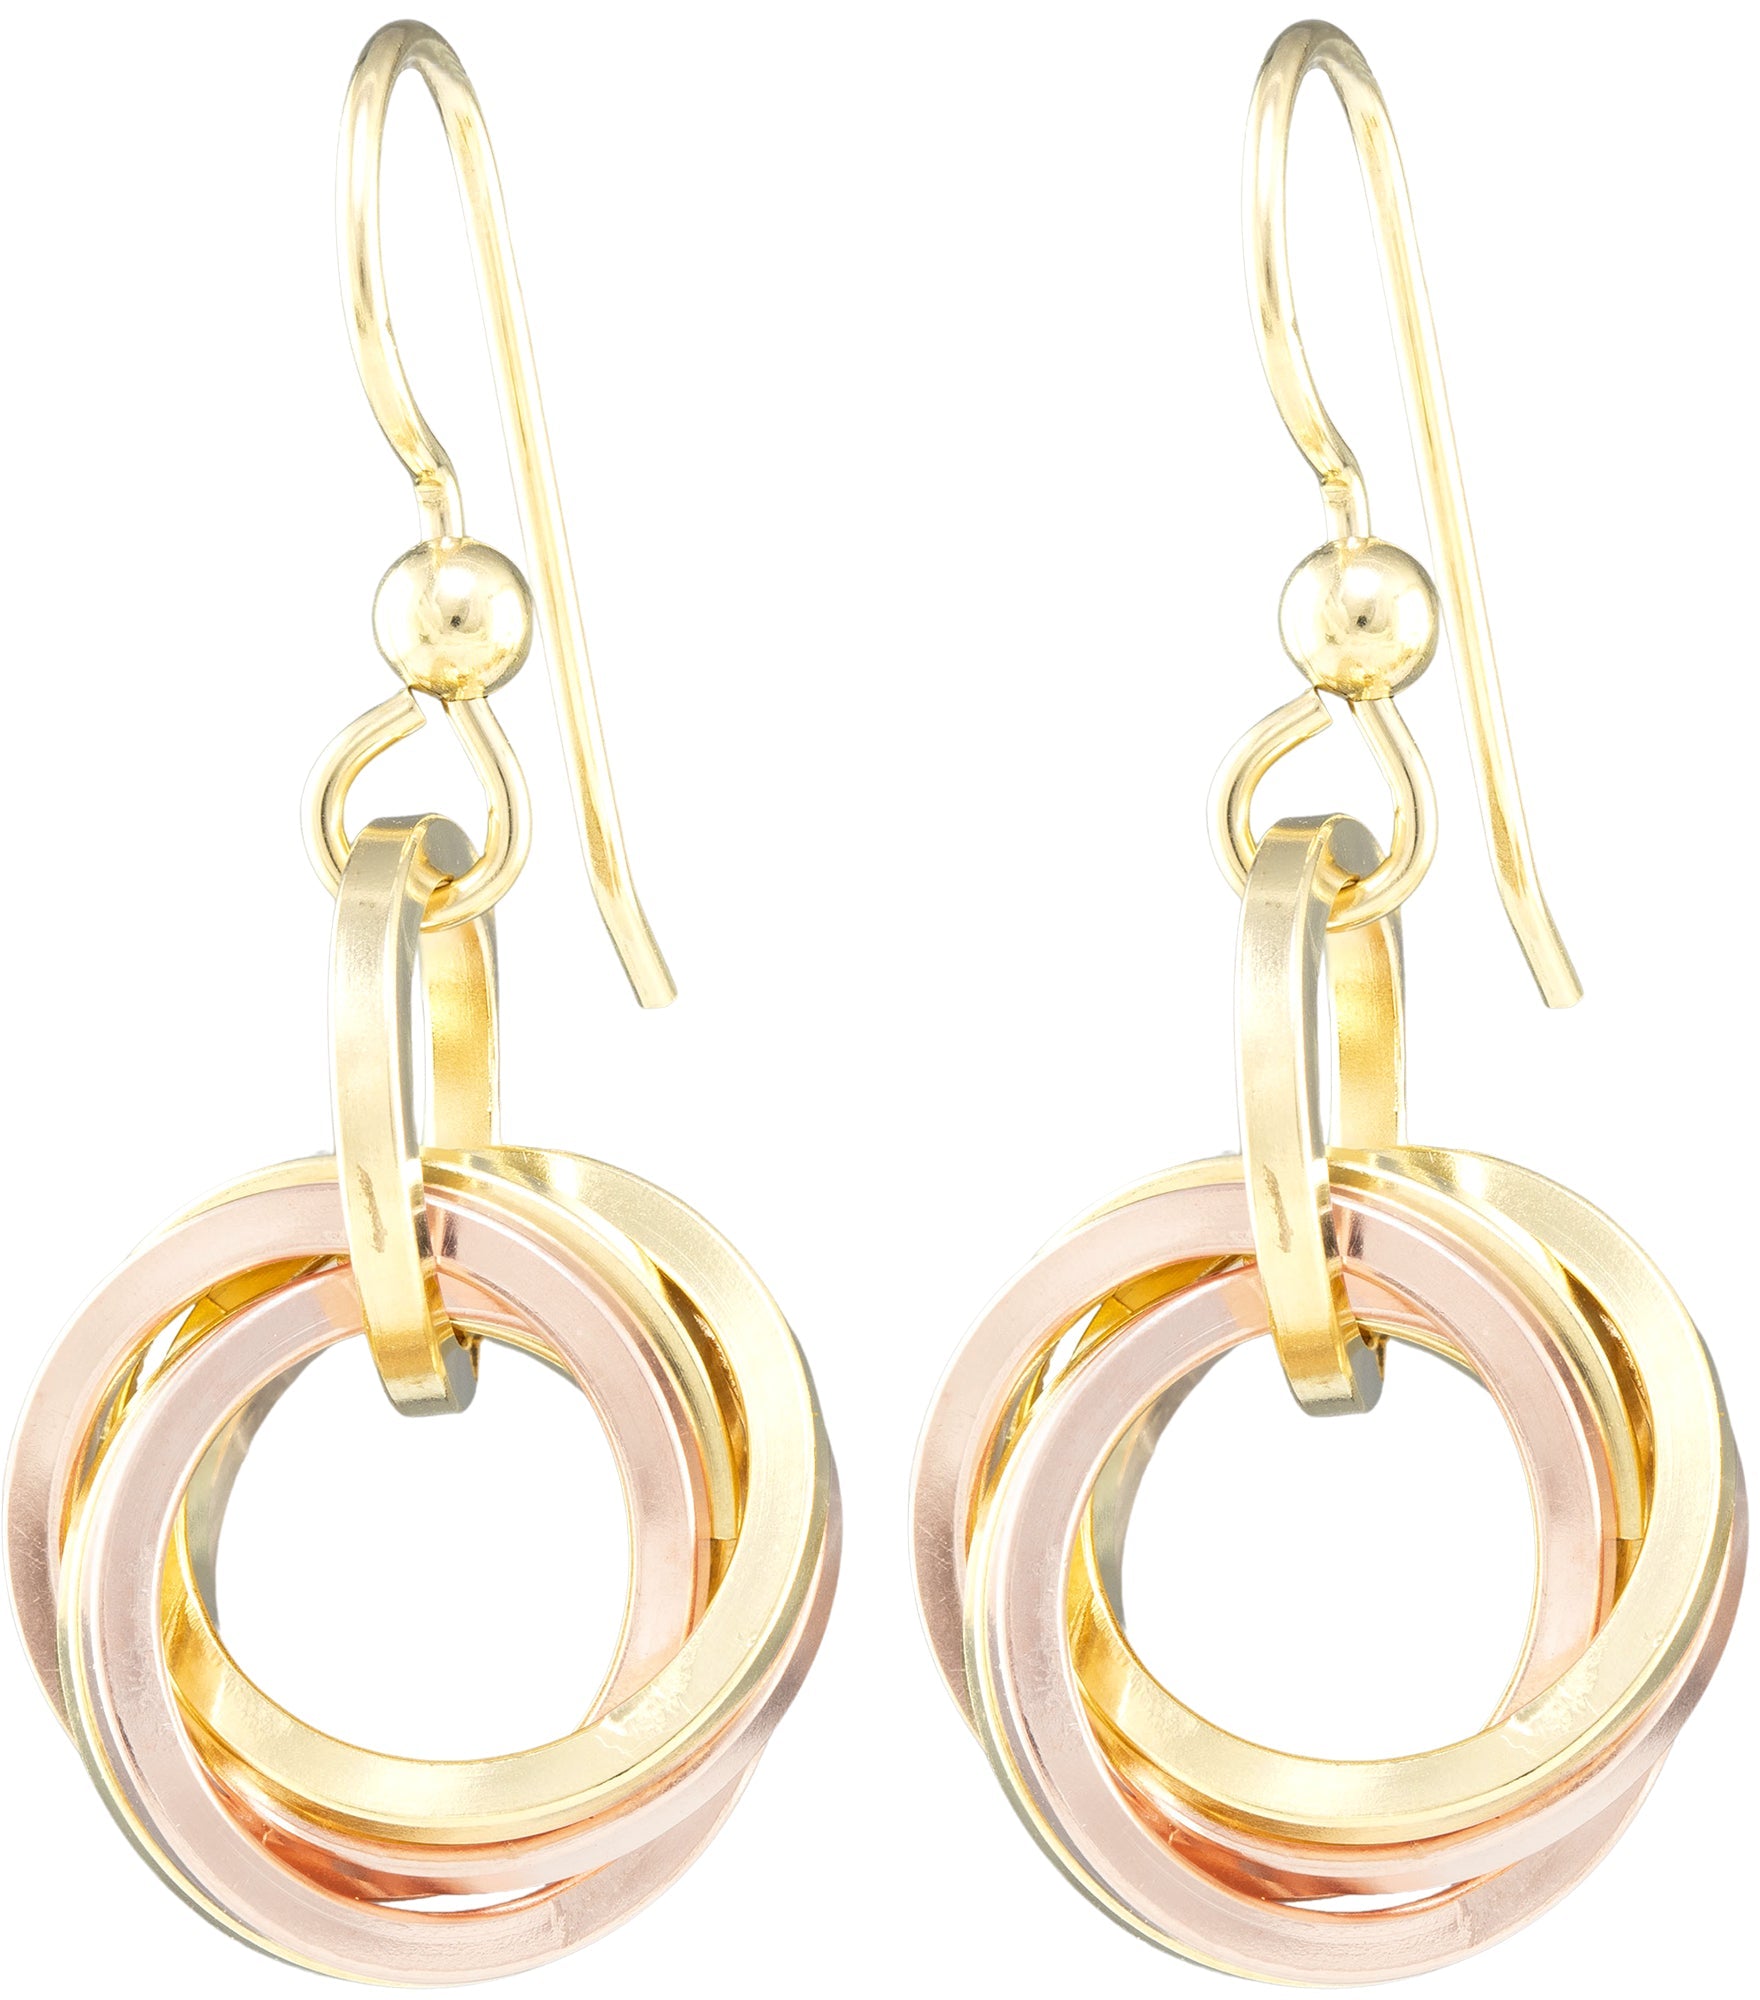 40% OFF - Mixed 14K Yellow and Rose Gold Fill Classic Love Knot Dangle Earrings